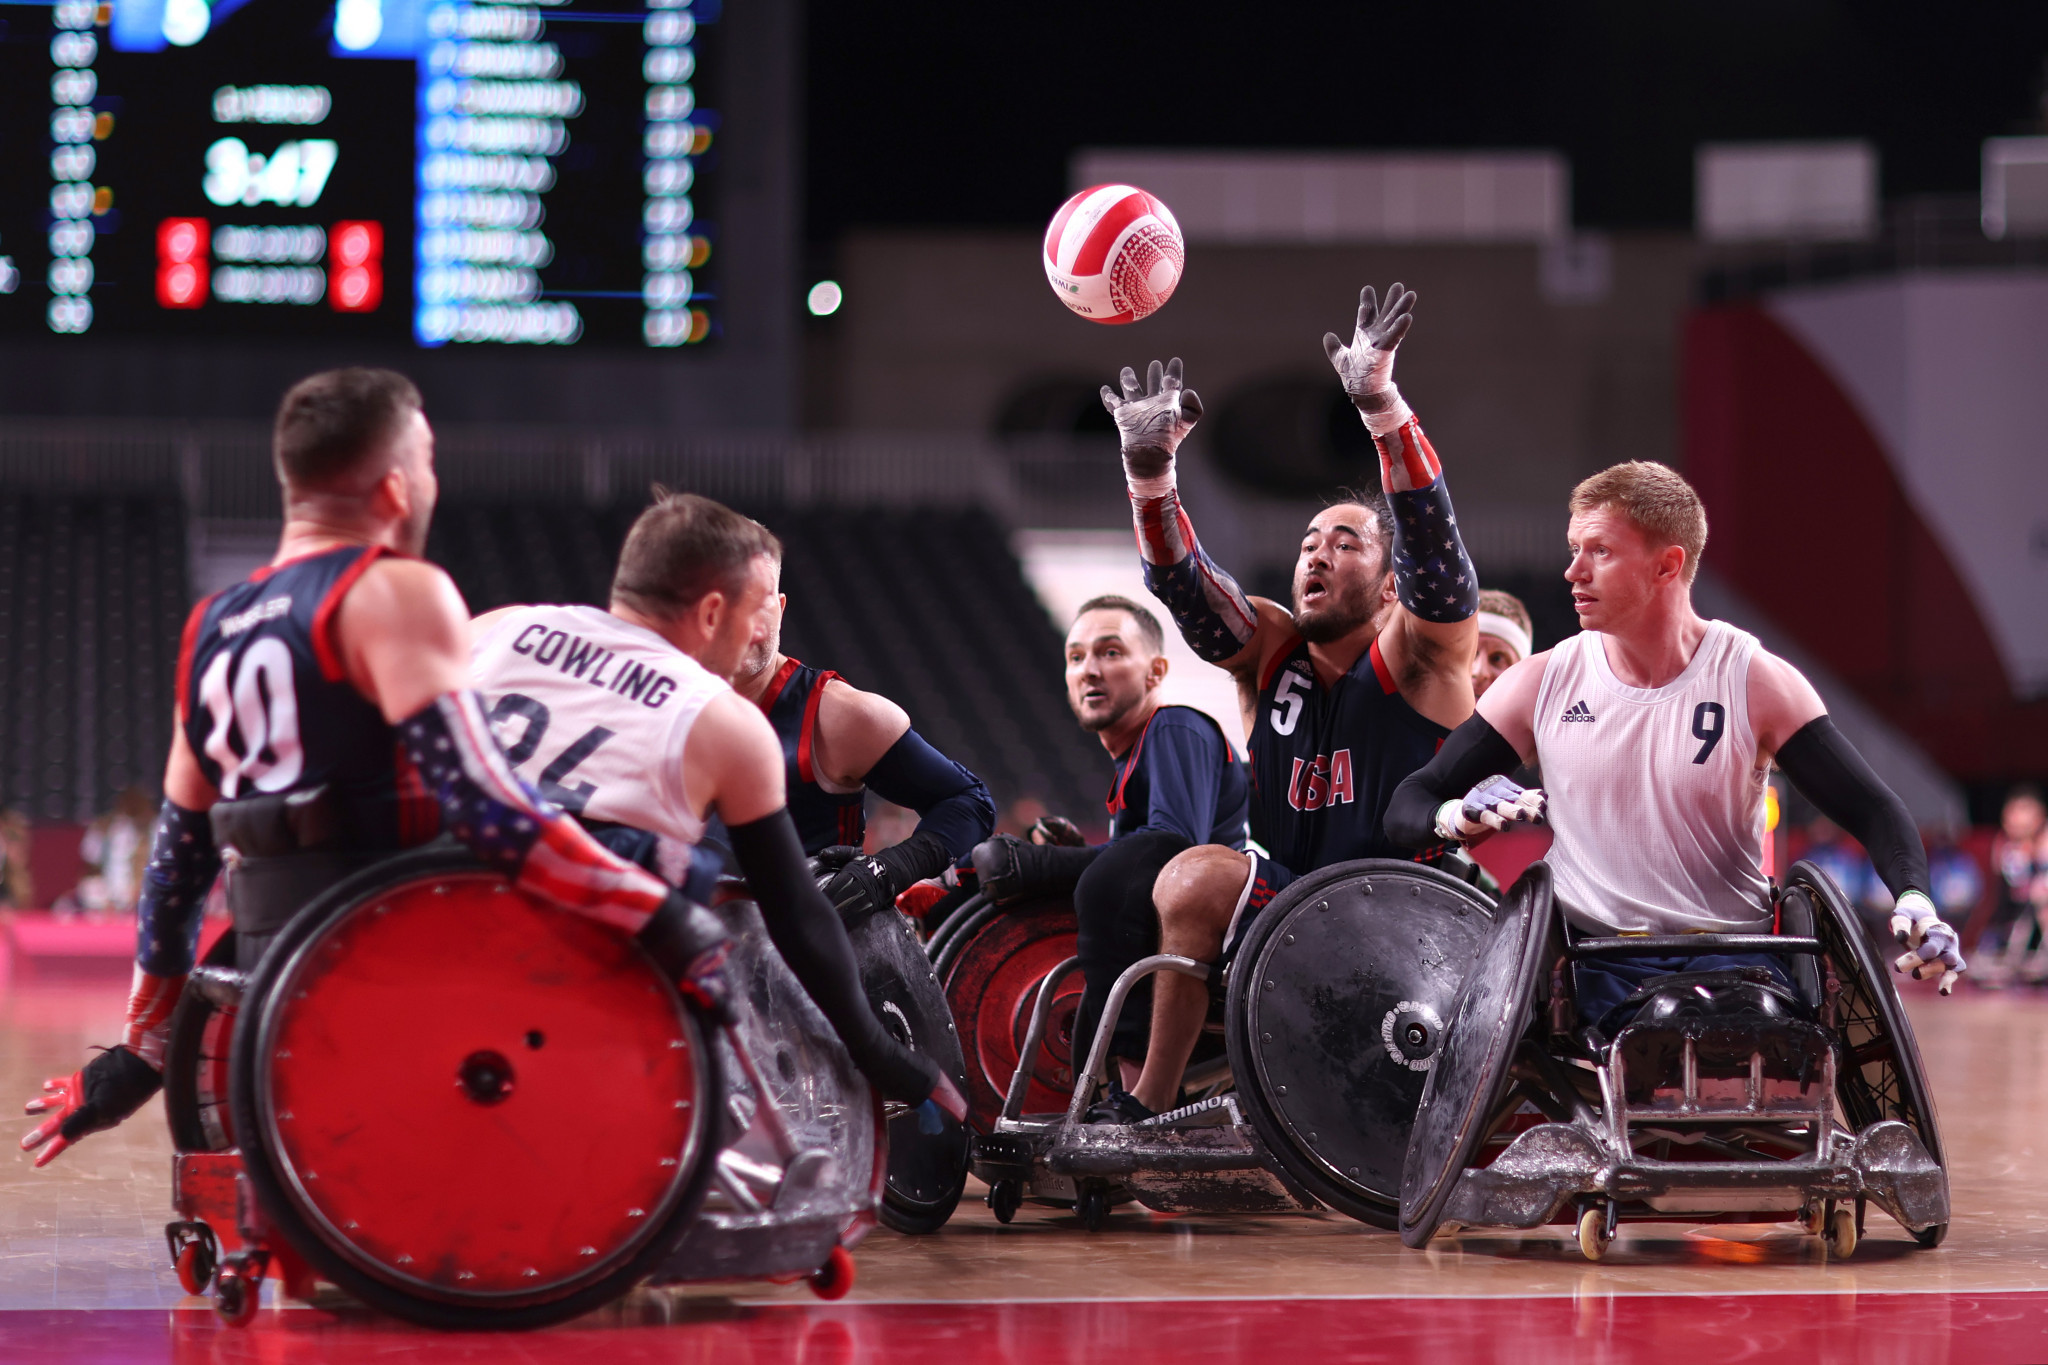 Britain and the United States are in the same pool at the Wheelchair Rugby World Championship ©Getty Images